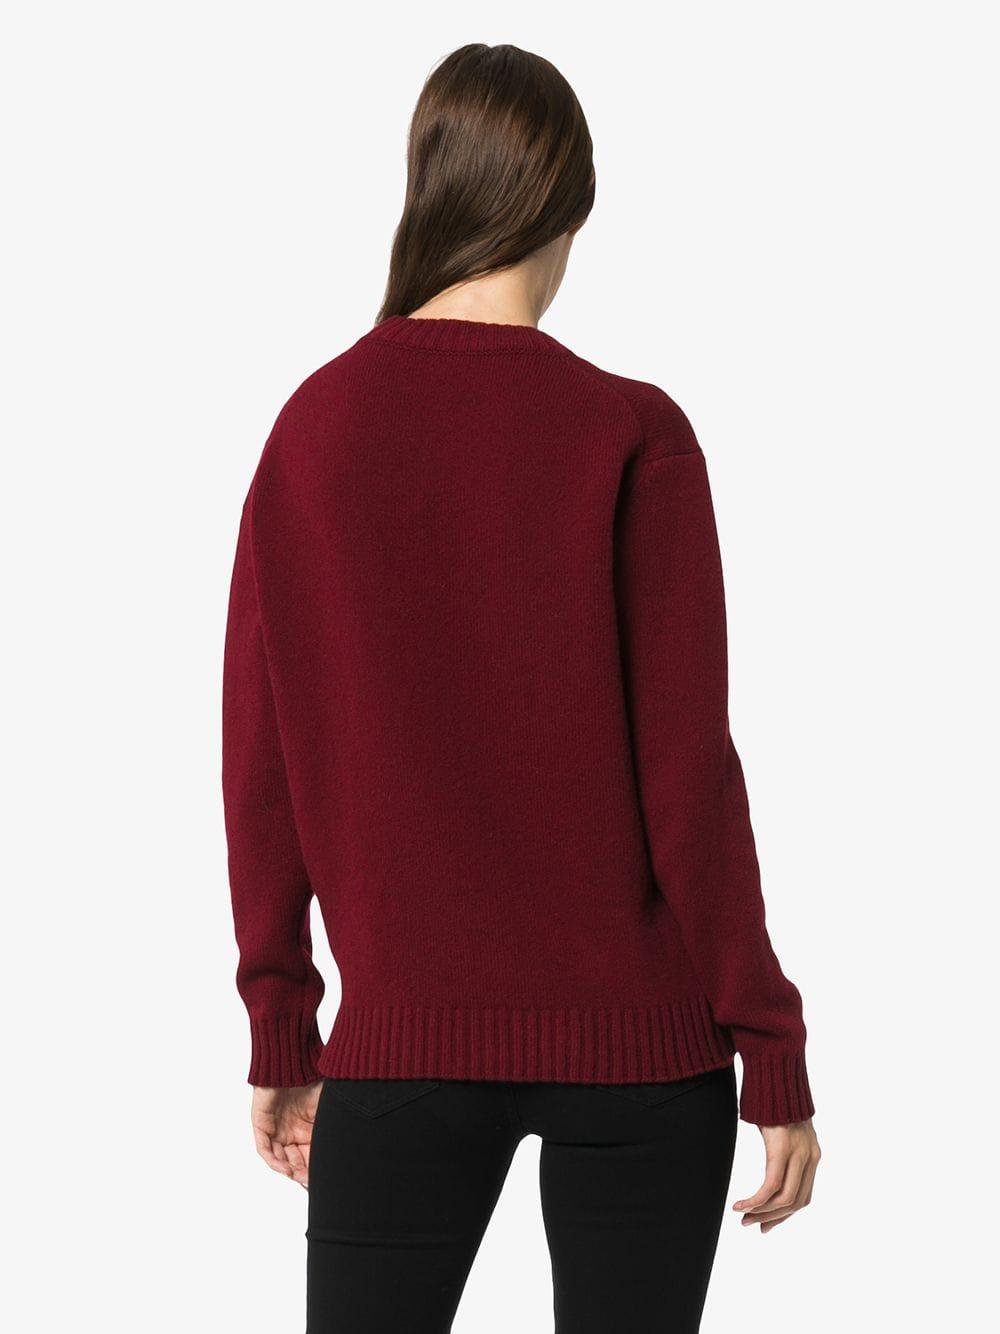 Moncler Aspen Cashmere And Wool Sweater in Burgundy (Red) | Lyst